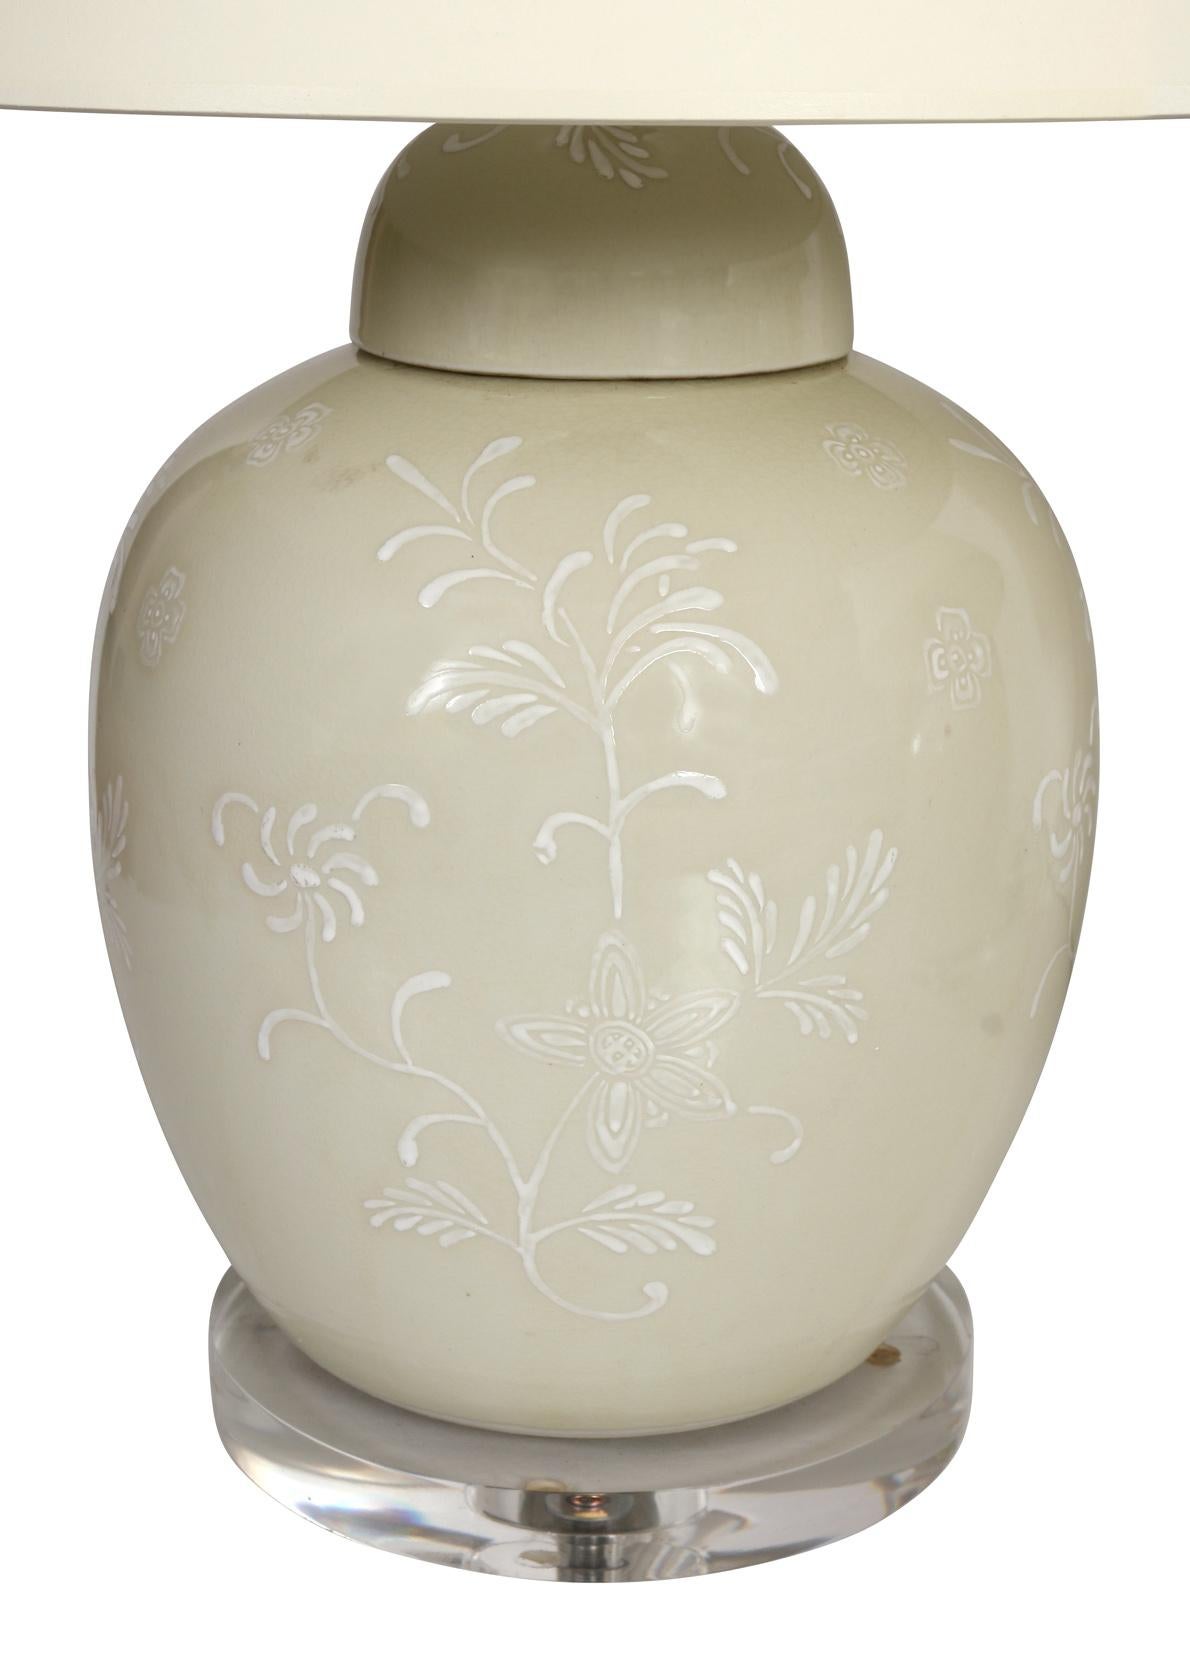 These urn shape lamps are neutral in tone, but the shape and lovely floral design throughout add dimension and detail. Their lucite base gives them a fresh, clean look. Lampshades not included.